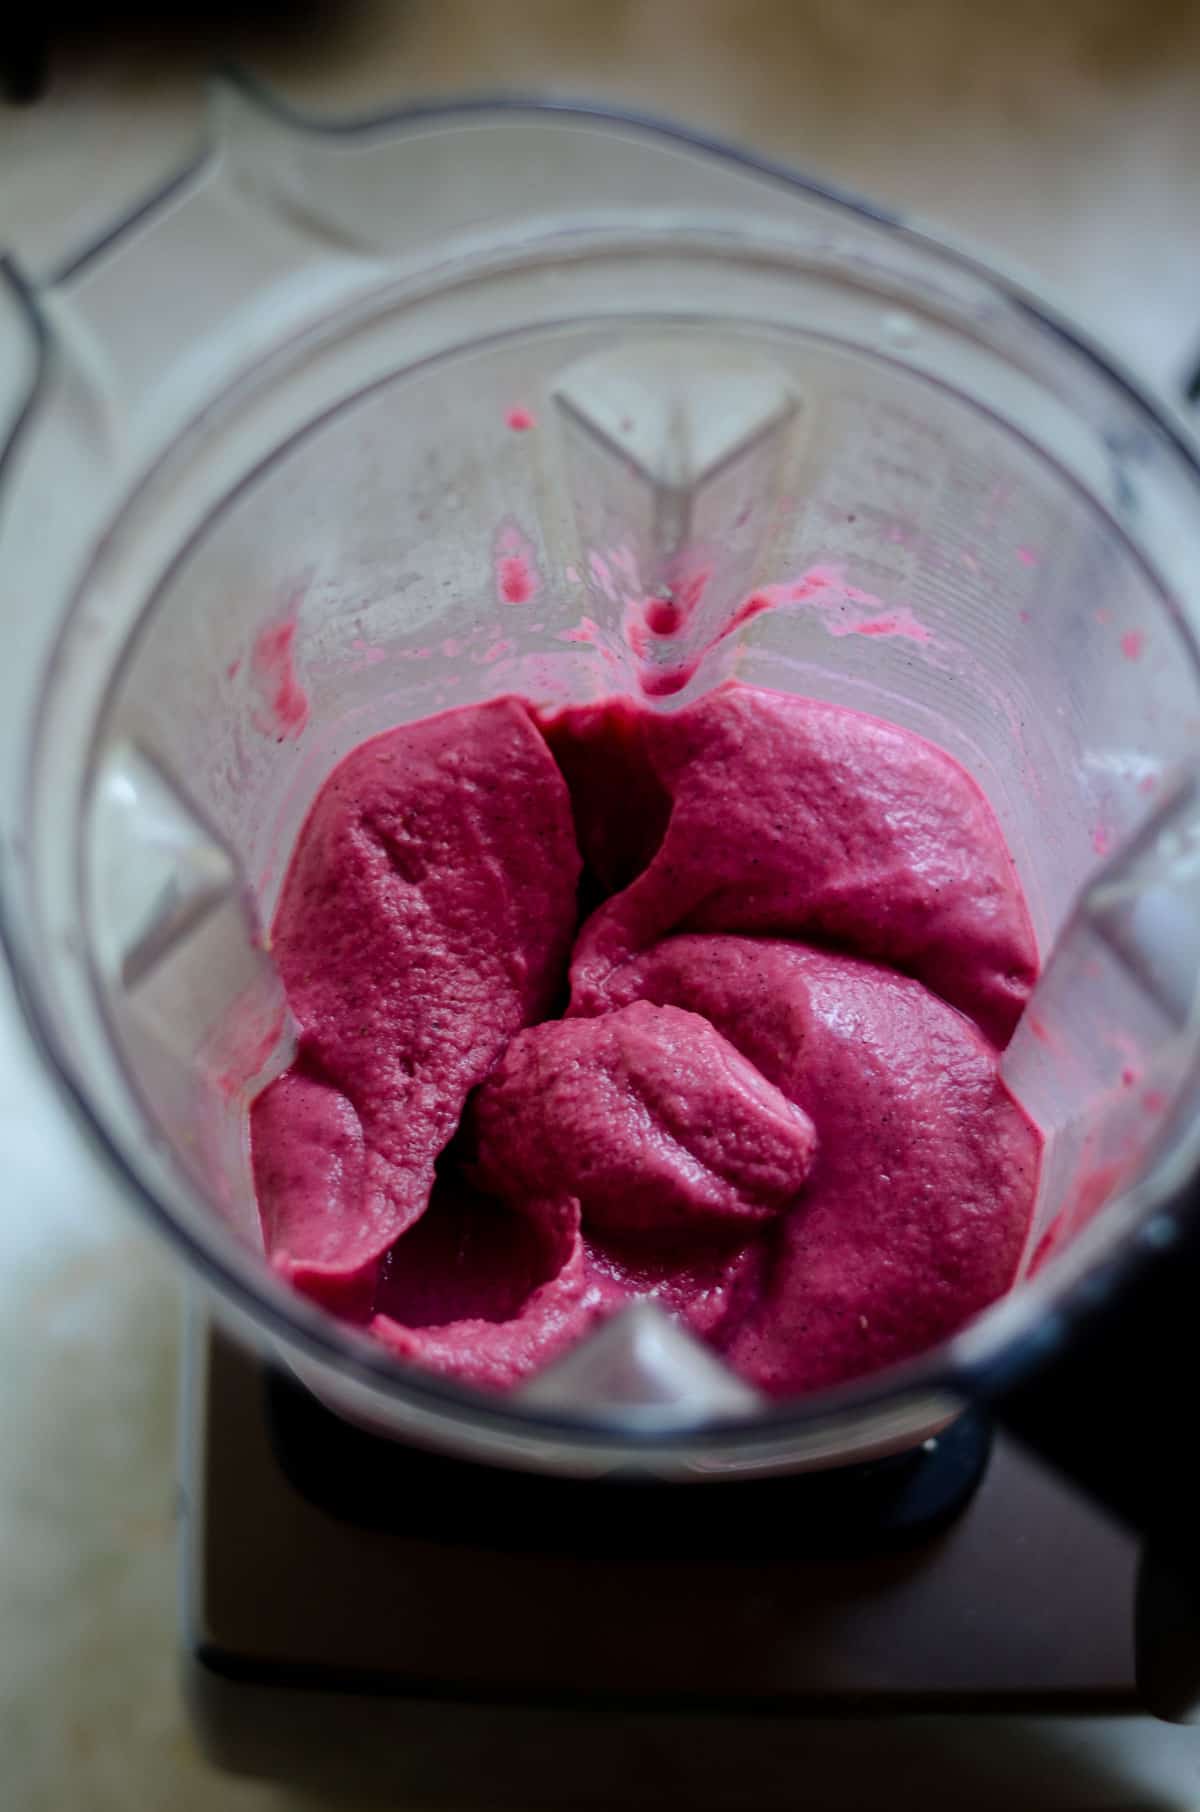 Thick creamy pink smoothie in the blender container.